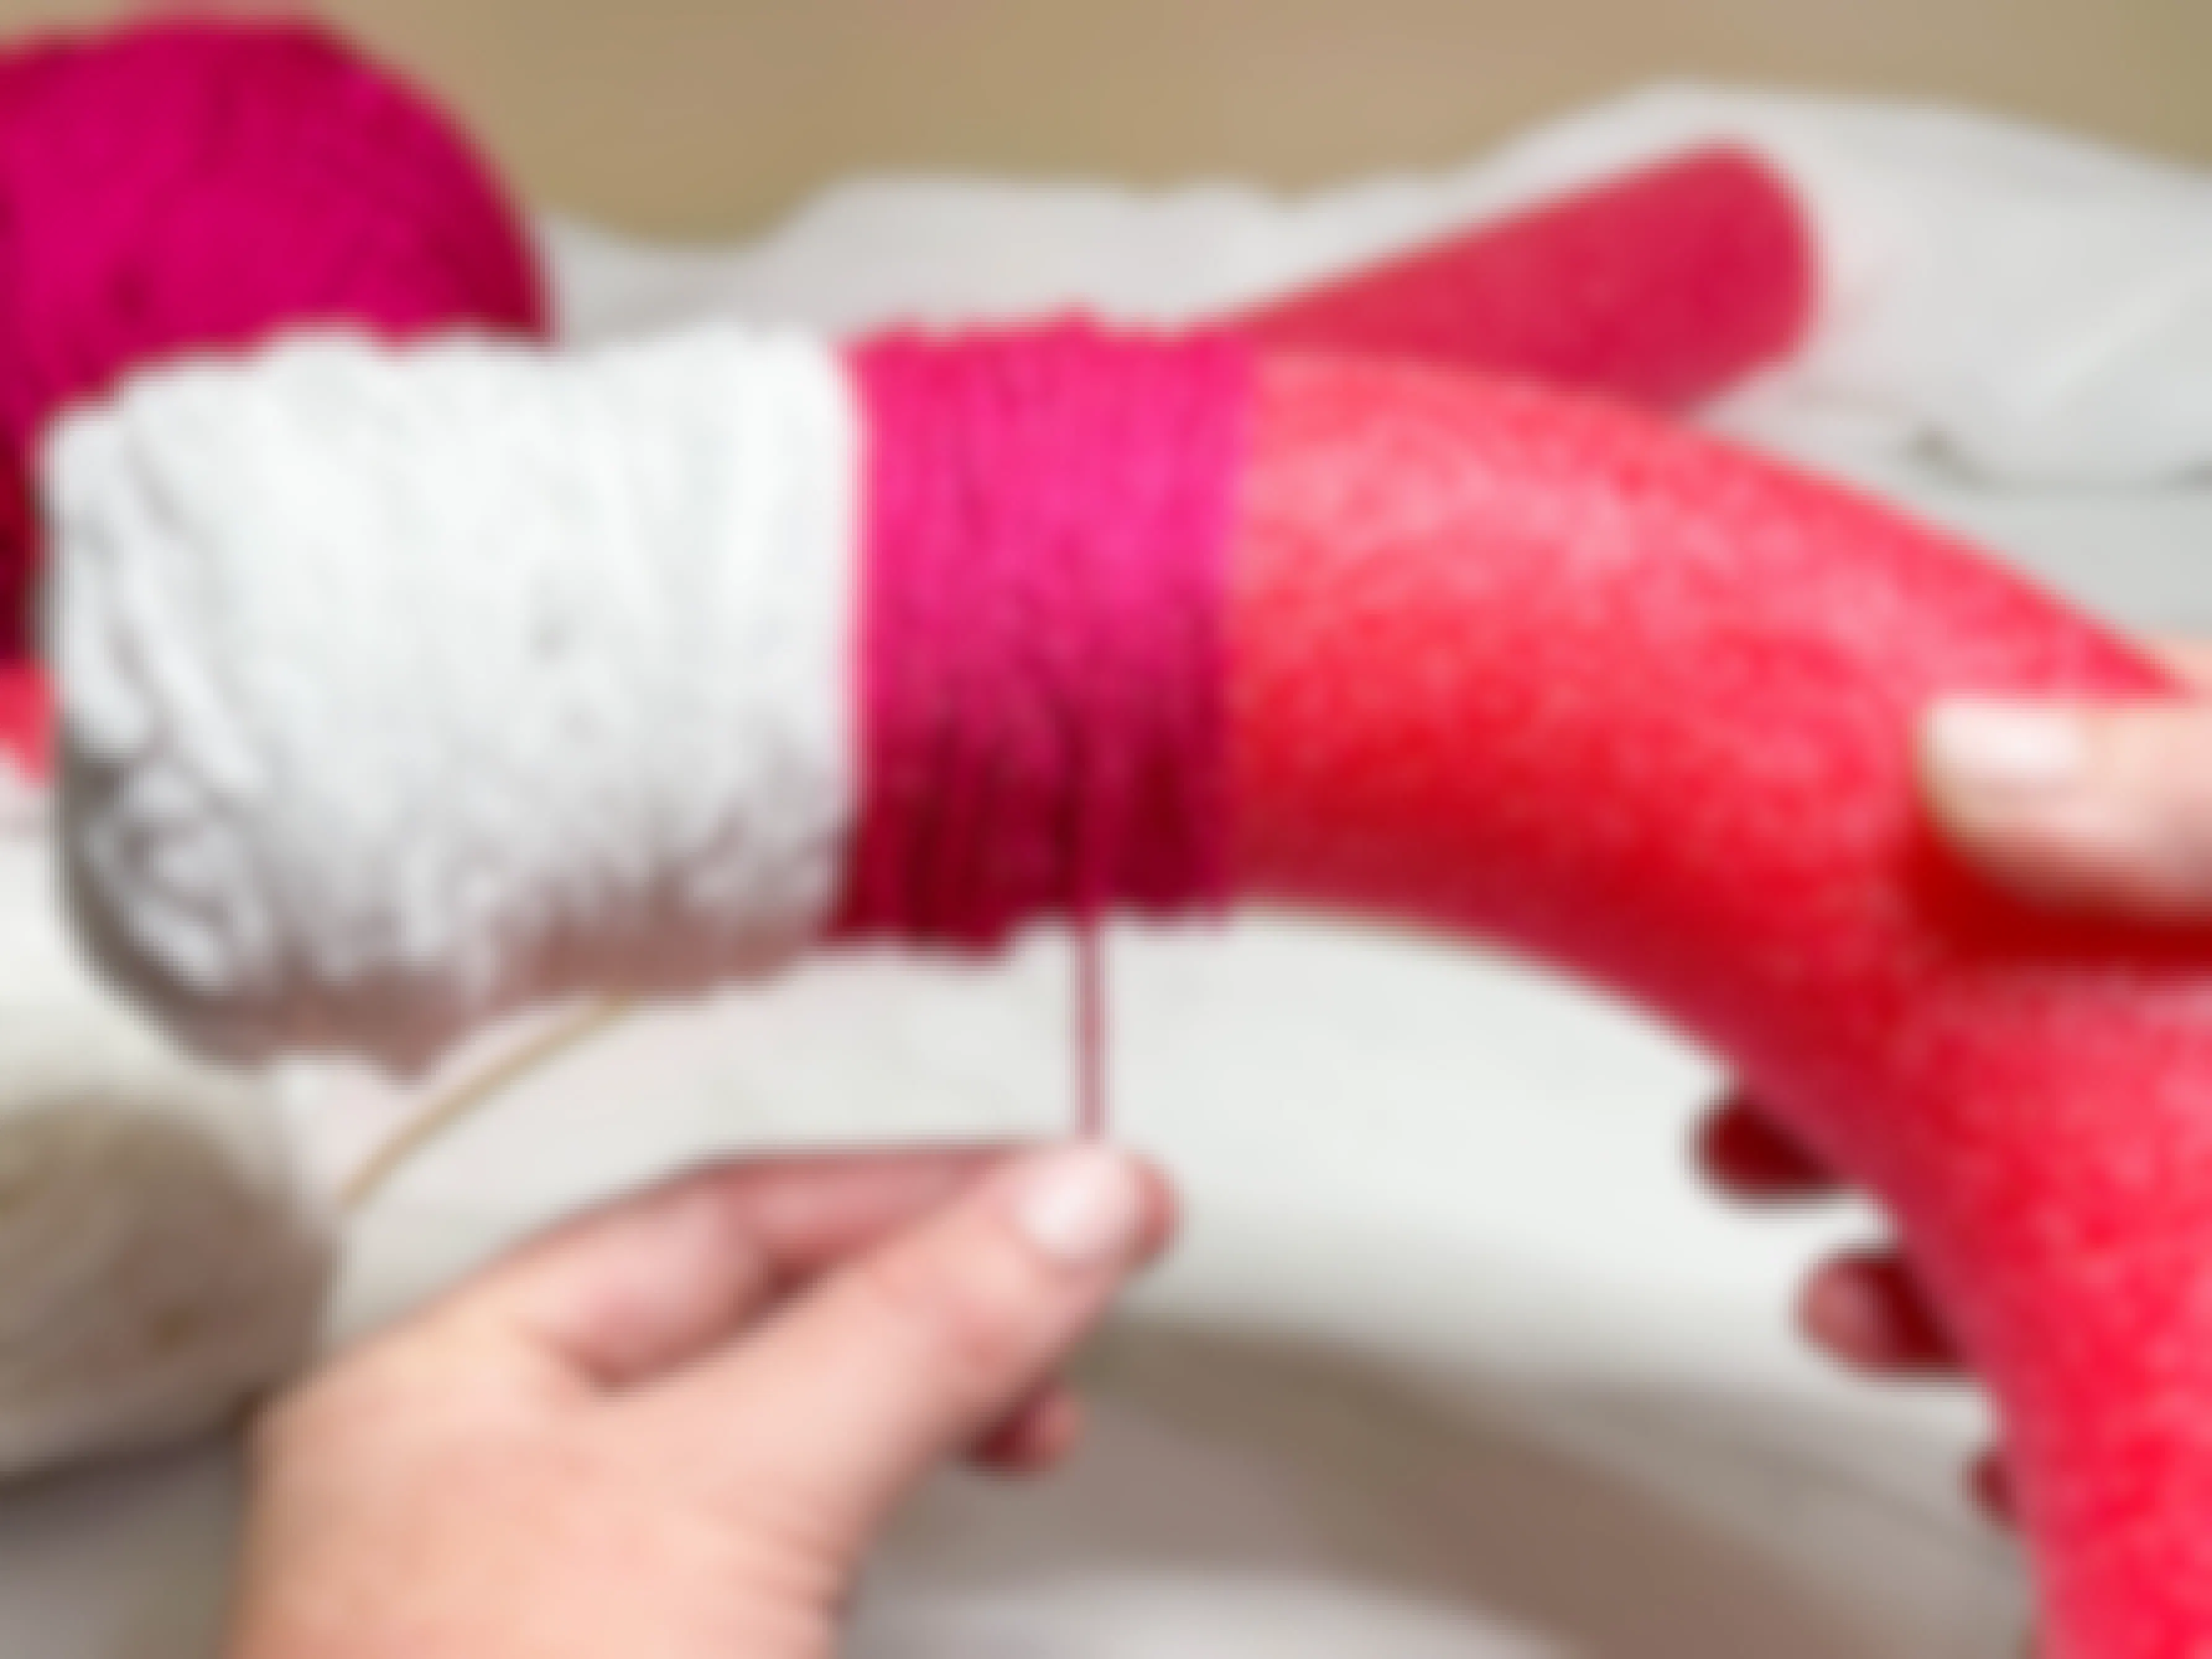 yarn being added to a pool noodle